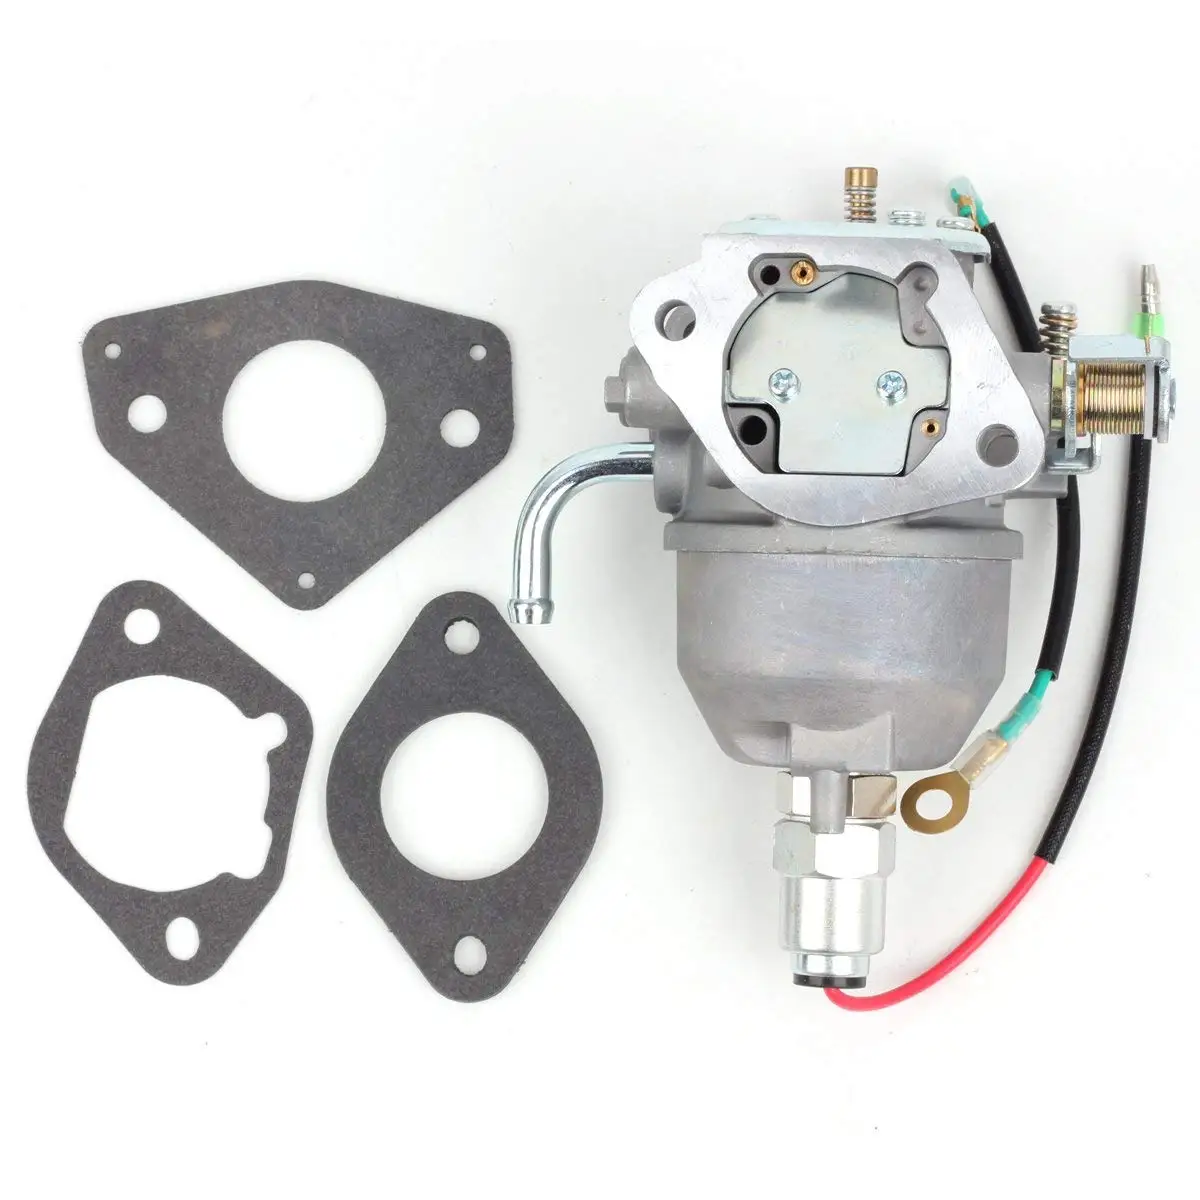 

Motorcycle 24 853 25-S 2485325-S 2405325 Carburetor with Gasket for Kohler CV20-22 Engine Motorbike Replacement Accessories Part